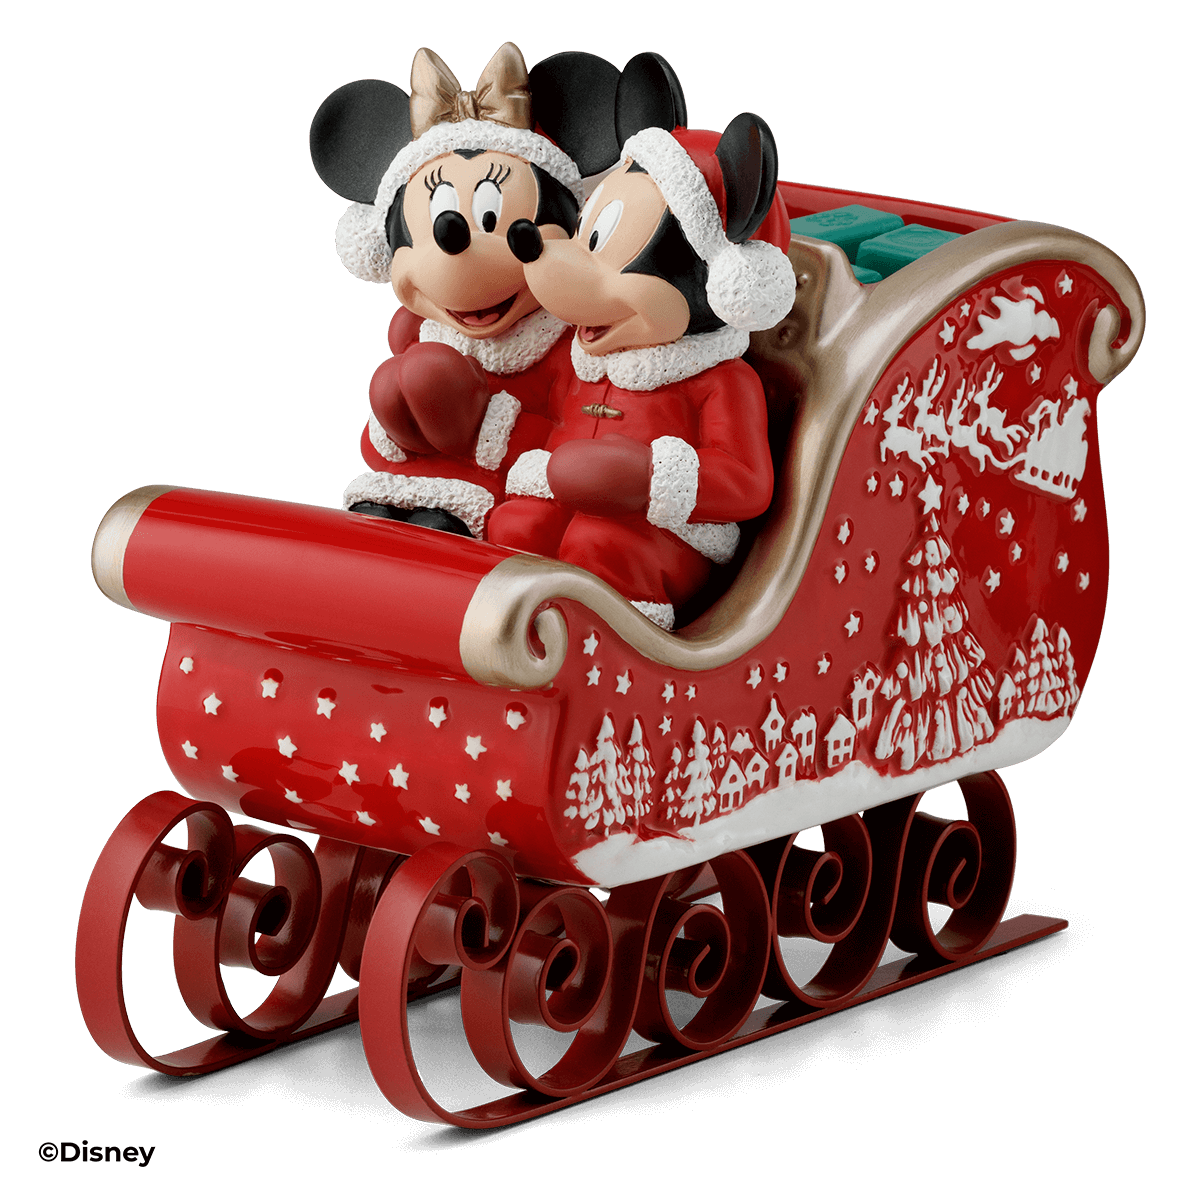 Christmas with Disney: Mickey Mouse and Minnie Mouse Scentsy Warmer